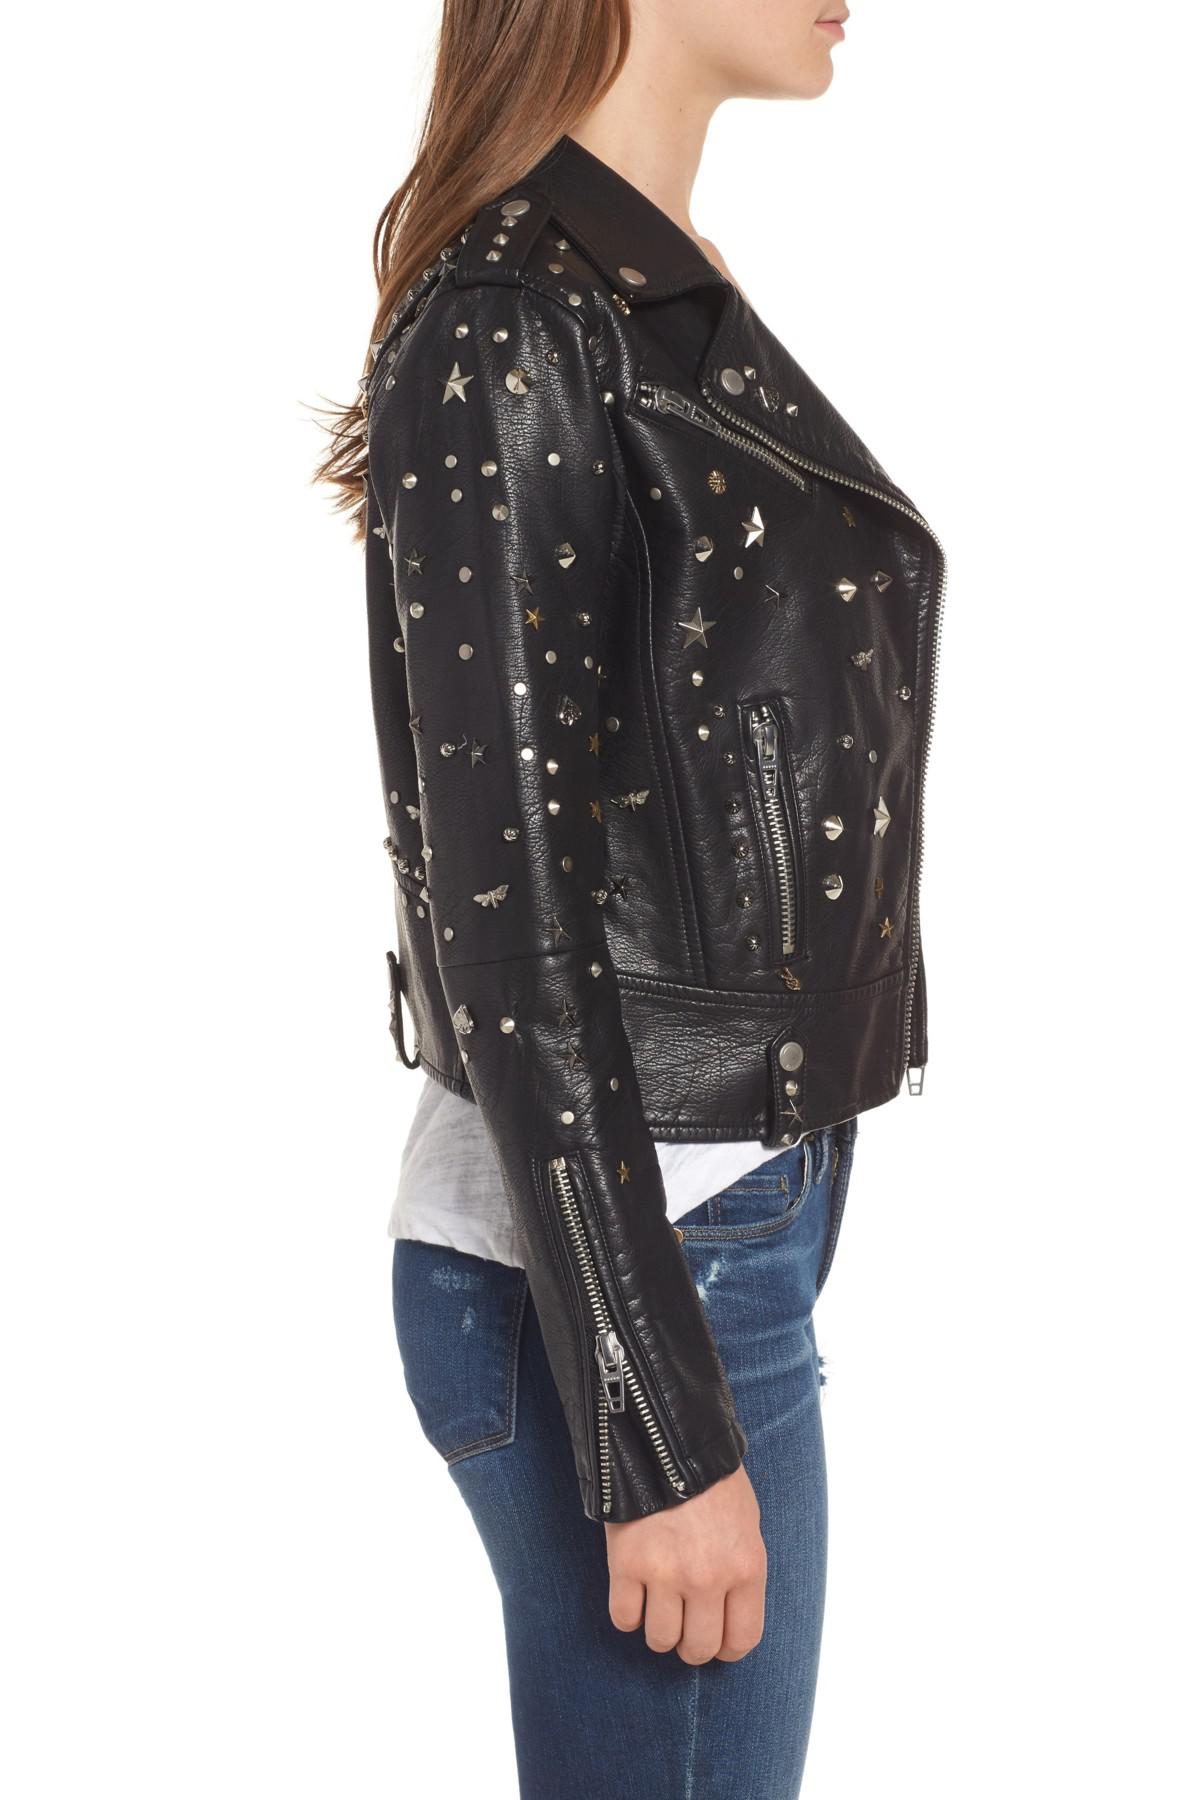 Blank NYC Studded Faux Leather Moto Jacket in Black - Lyst